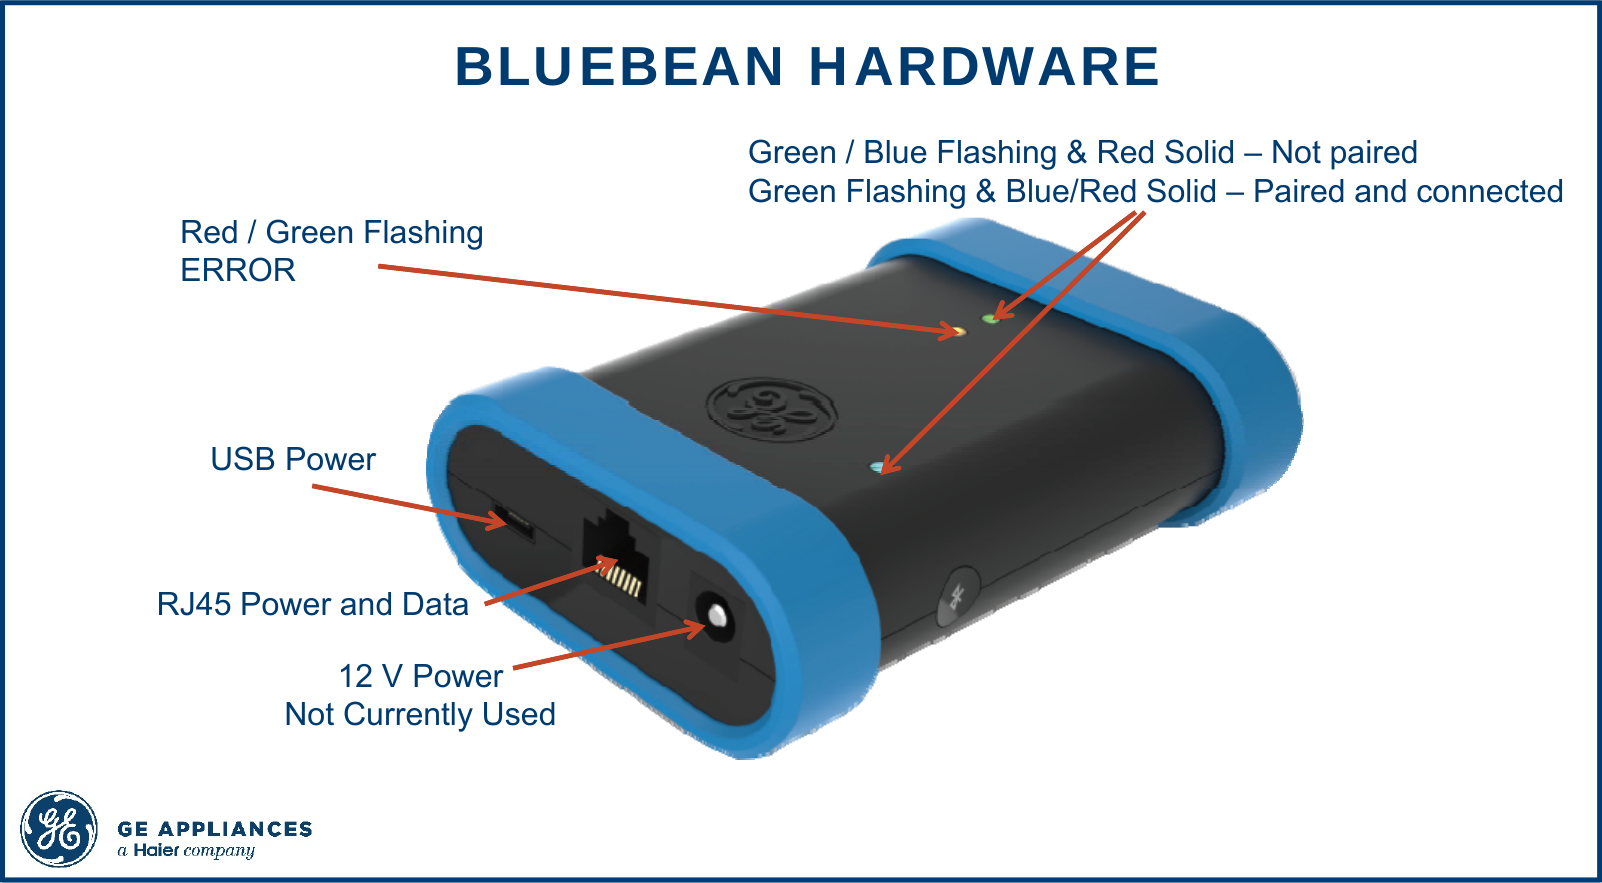 USB Power 12 V PowerNot Currently Used  RJ45 Power and DataGreen / Blue Flashing &amp; Red Solid – Not pairedGreen Flashing &amp; Blue/Red Solid – Paired and connectedRed / Green Flashing ERRORBLUEBEAN HARDWARE